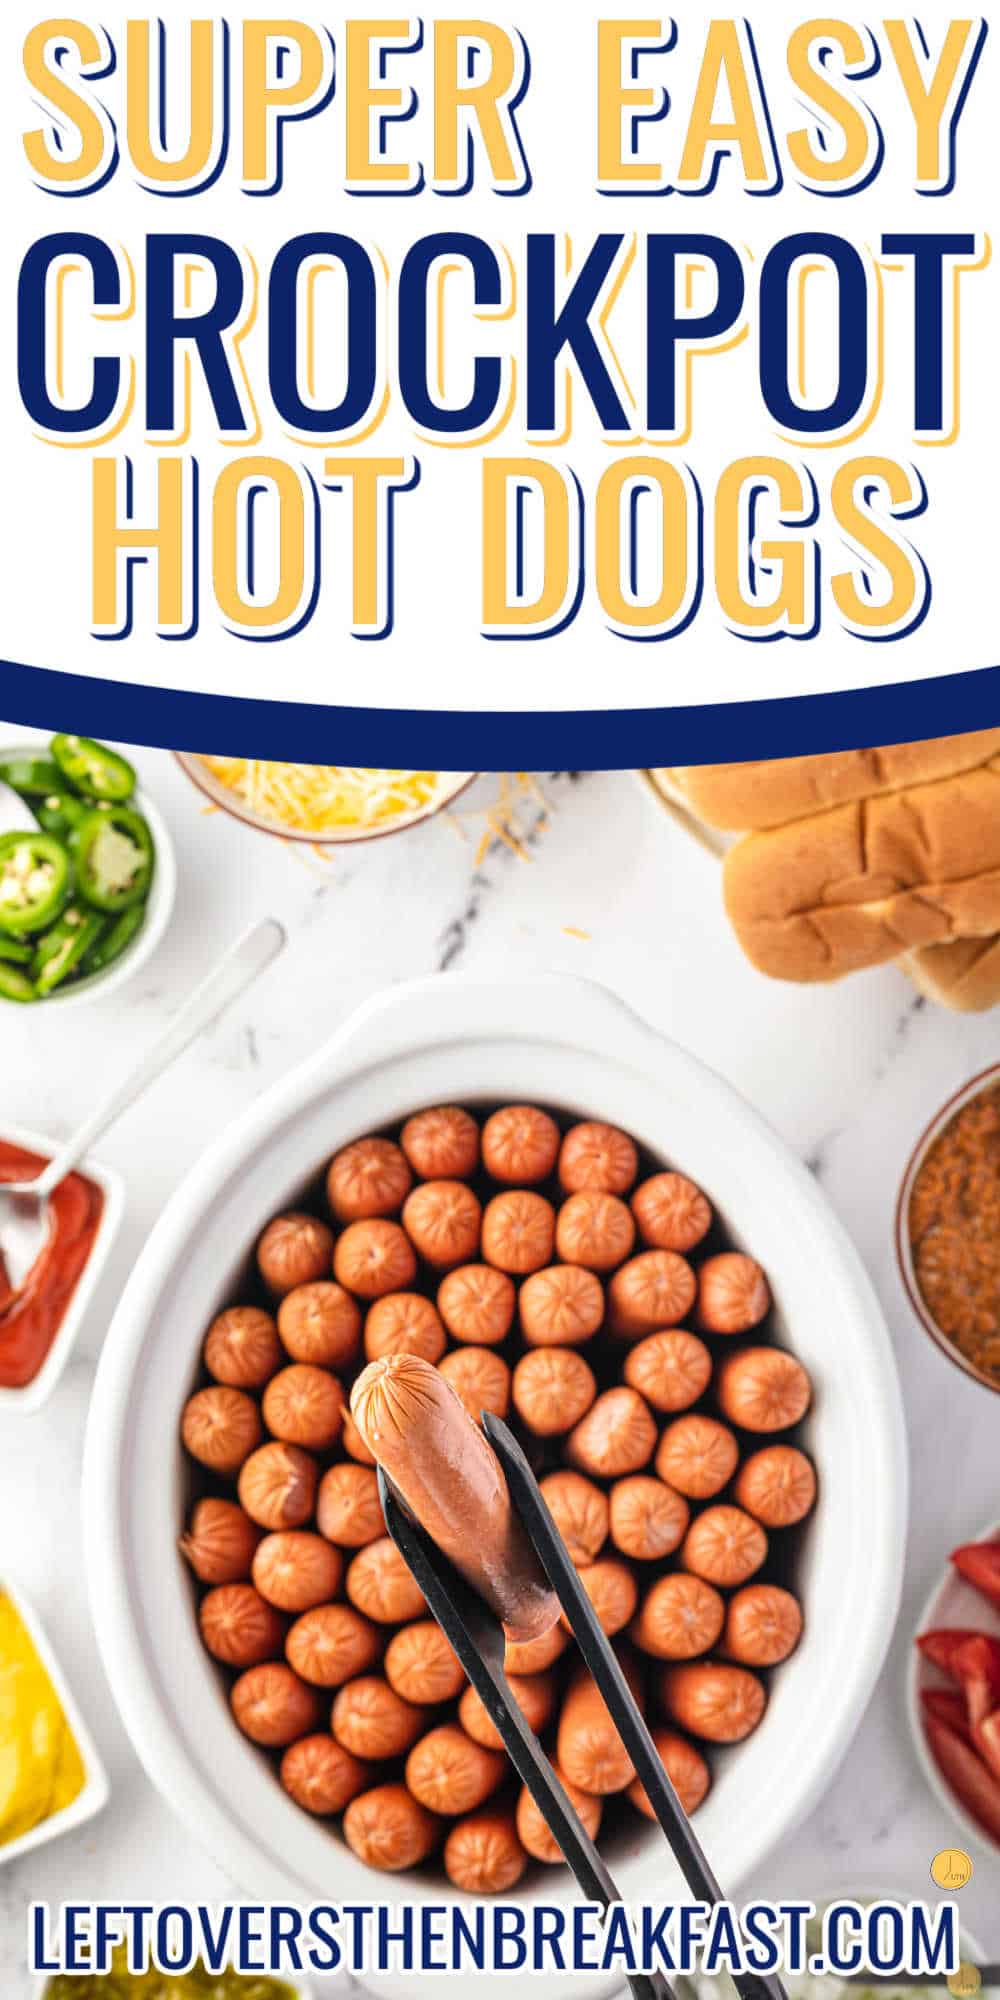 pinterest image for crock pot hot dogs with text "slow cooker hot dogs for a crowd!"